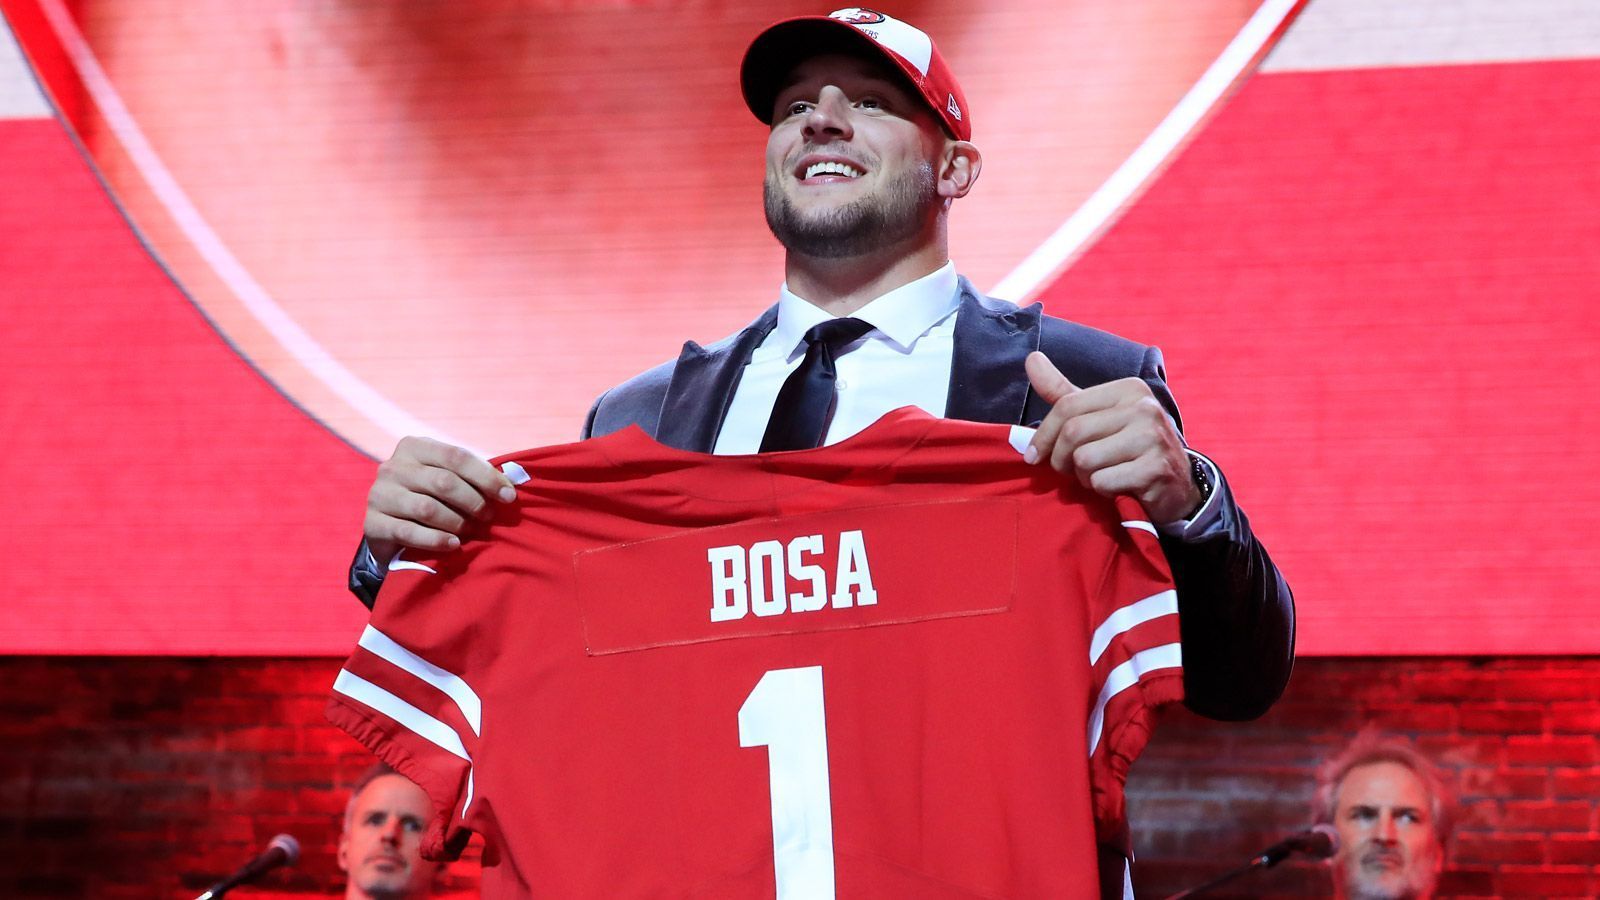 
                <strong>Draft Pick 2: San Francisco 49ers</strong><br>
                Spieler: Nick BosaPosition: Defensive EndCollege: Ohio State
              